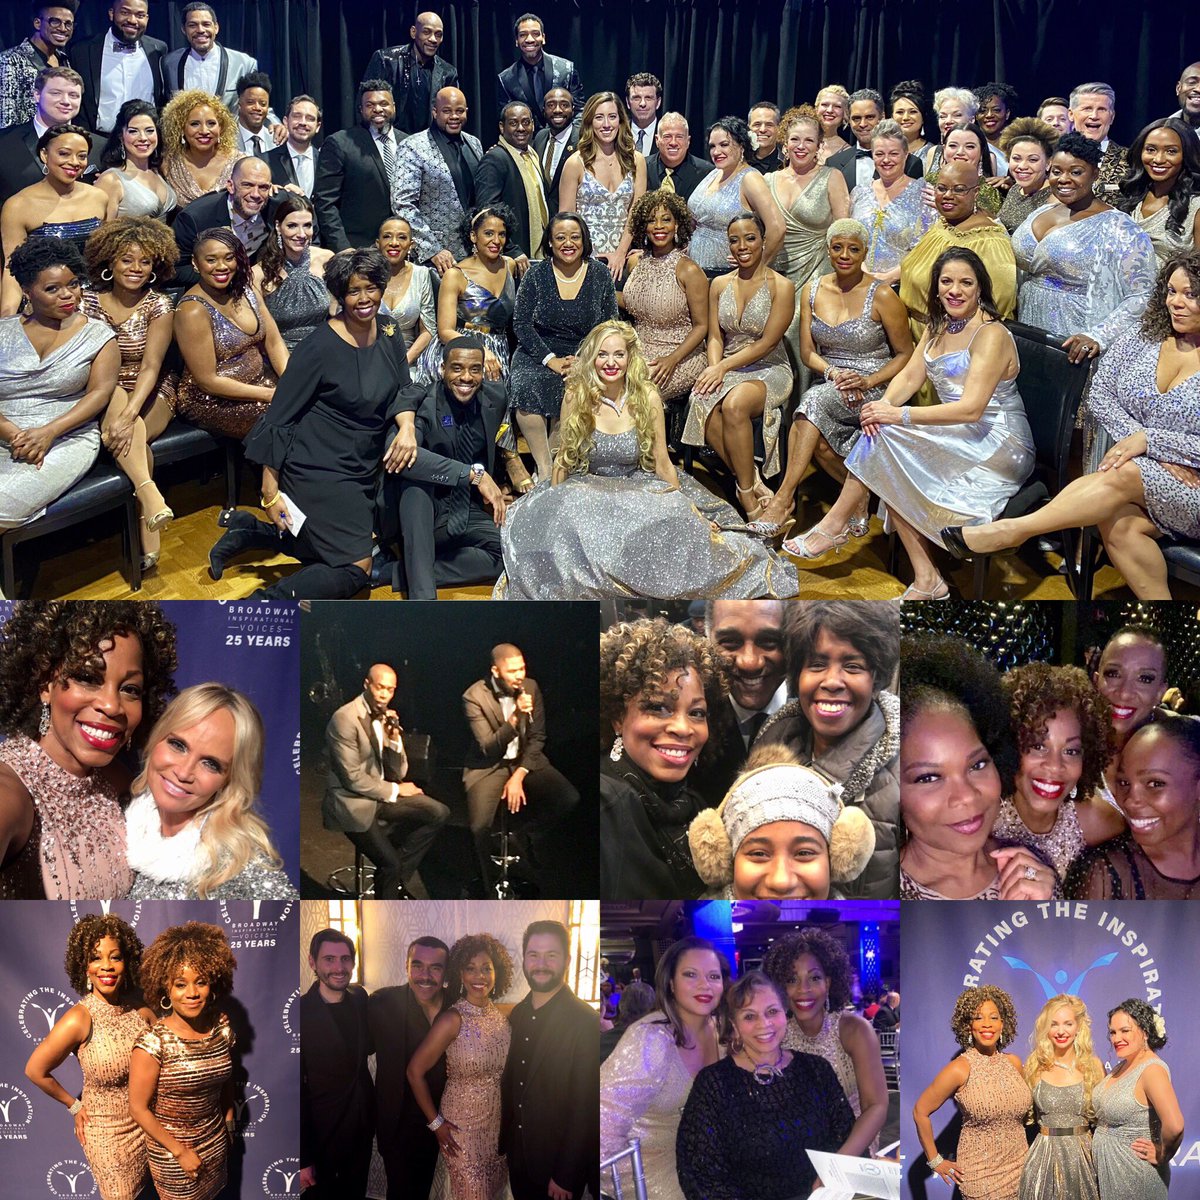 What a phenomenal Silver Anniversary Celebration @edisonballroom!! I Thank God for the Healing Balm @BIVoices has been in my life for over 20 years! ThankYou Michael McElroy for your Excellence, Your Vision, Your Obedience! #Hope #Transform #Inspire